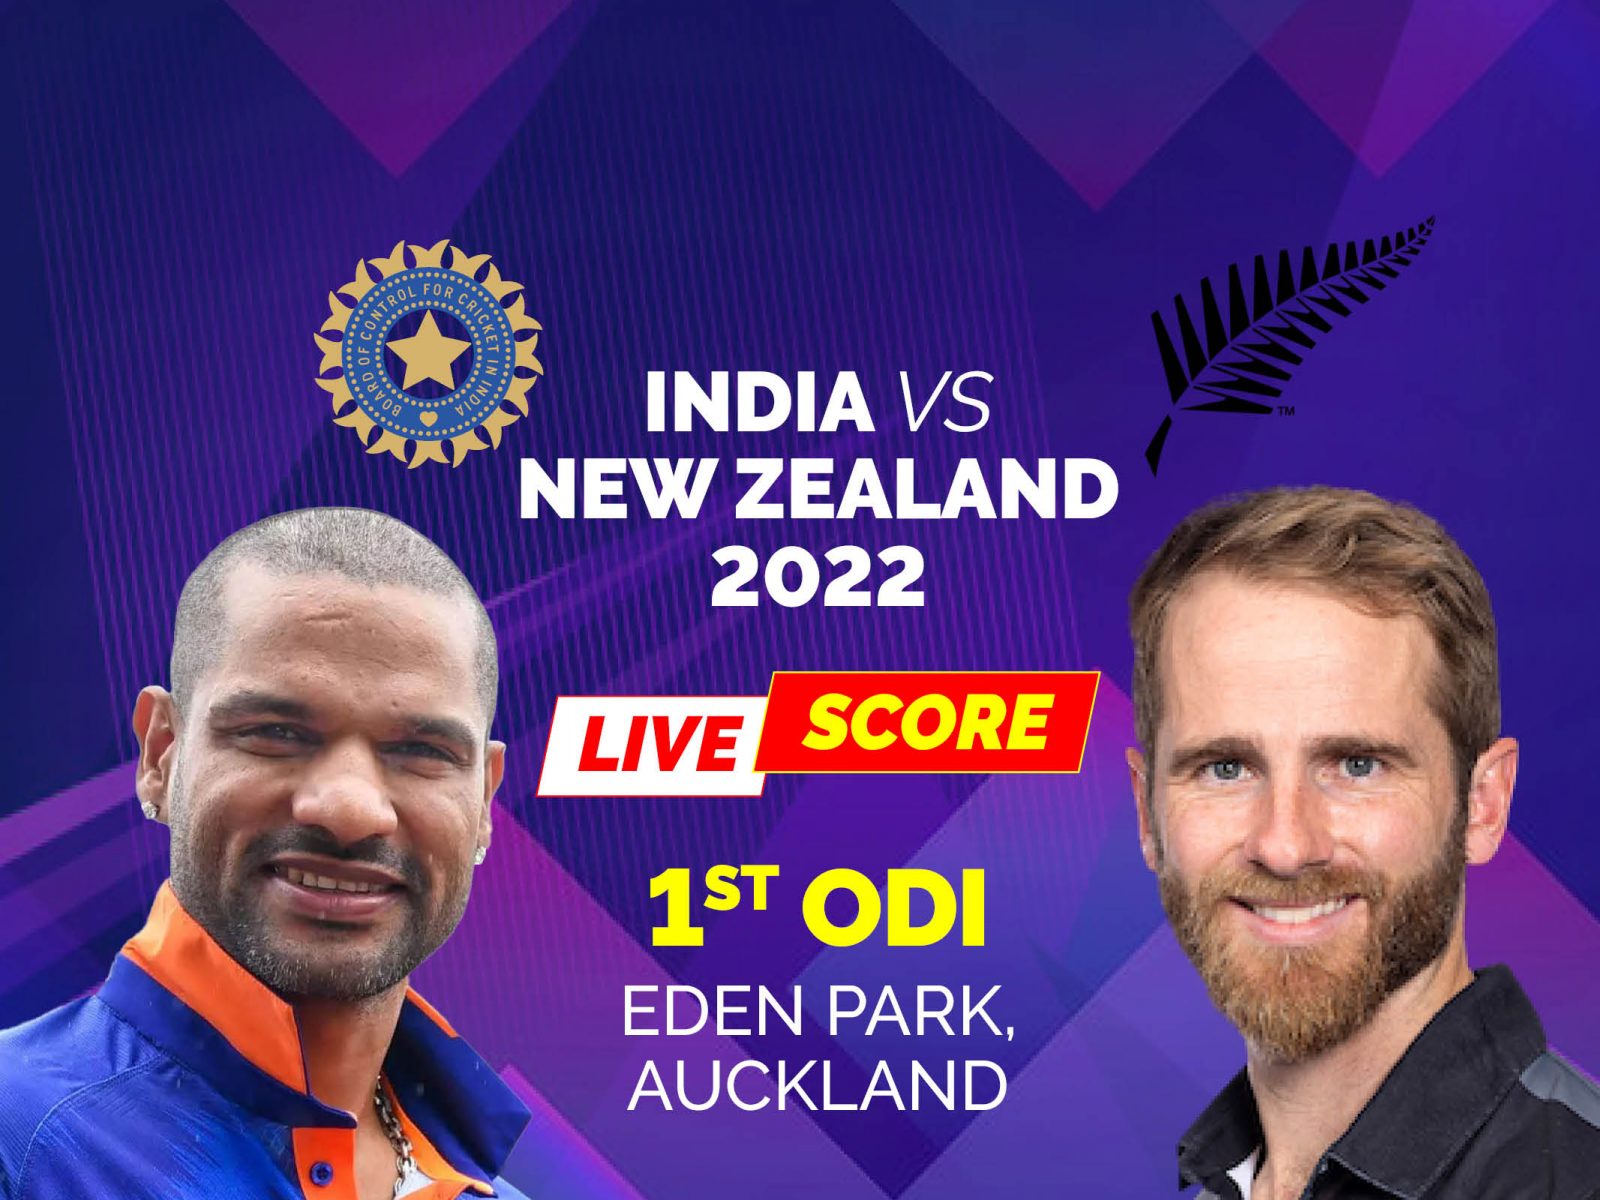 IND vs NZ 2022 Highlights 1st ODI Tom Latham 145*, Kane Williamson 94* Star as New Zealand Pummel India by 7 Wickets